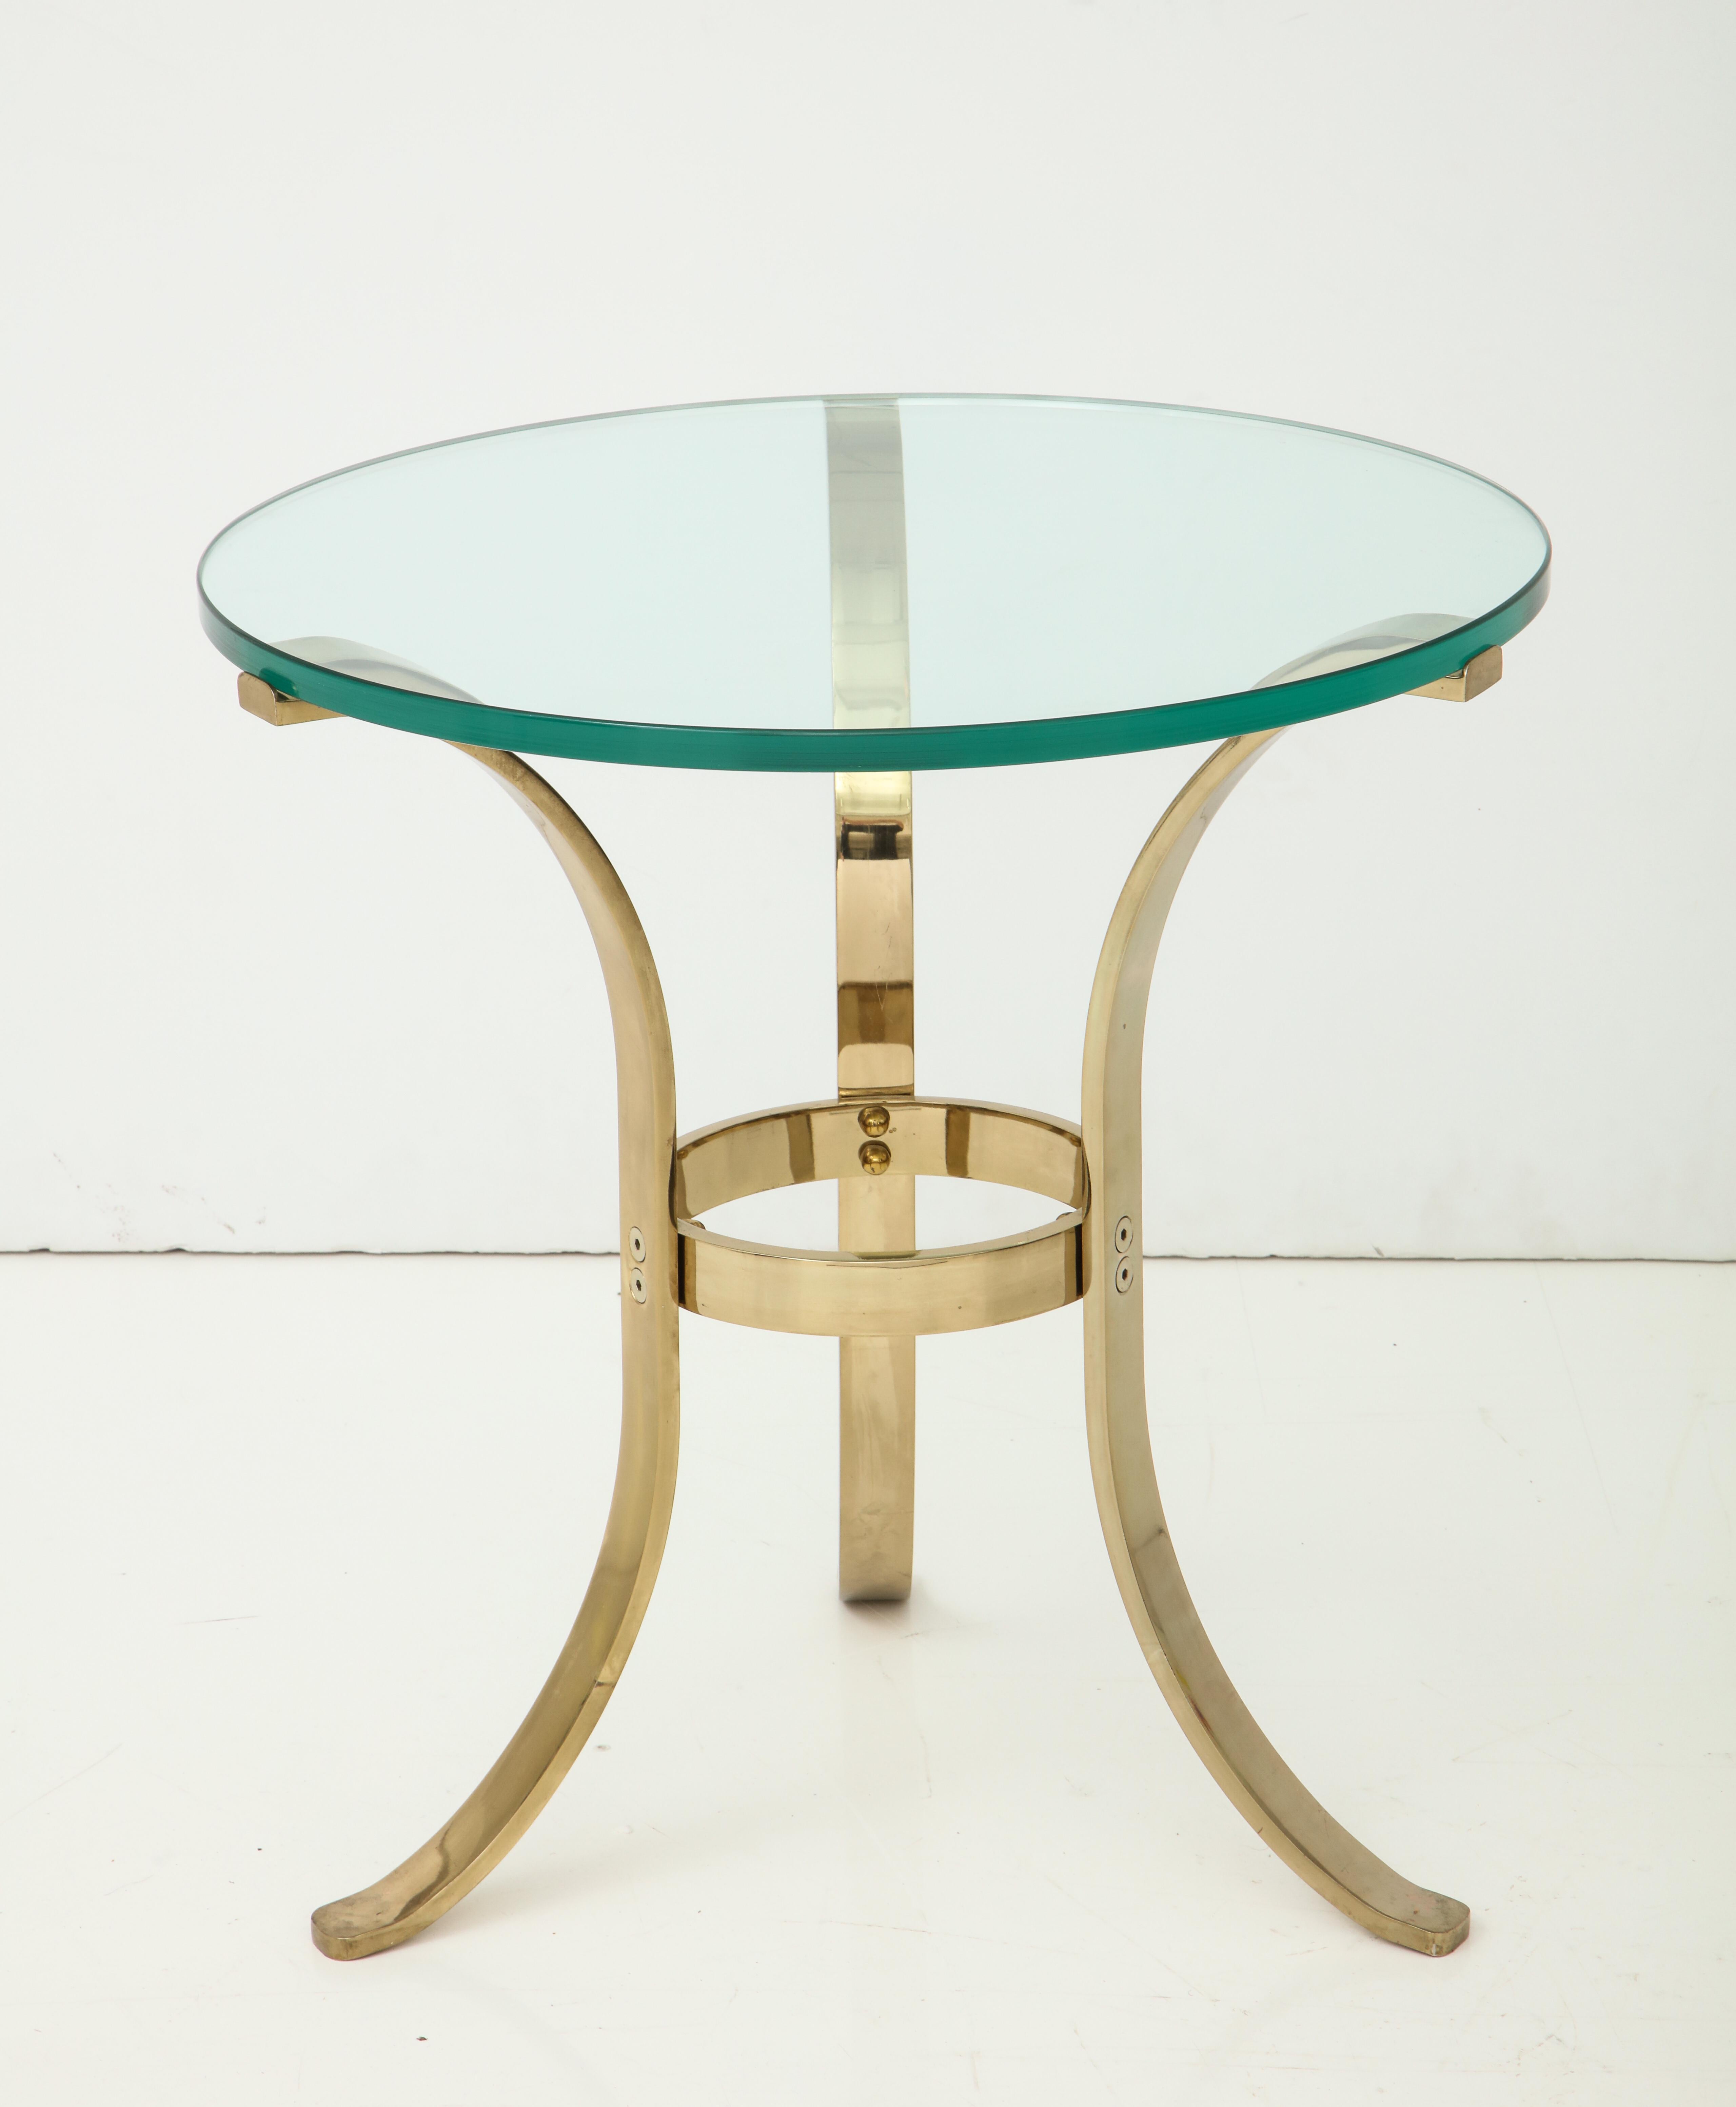 1970s polished brass tri-pod side table.
The heavy polished brass table base with minimal wear consistent with age supports a new 3/4